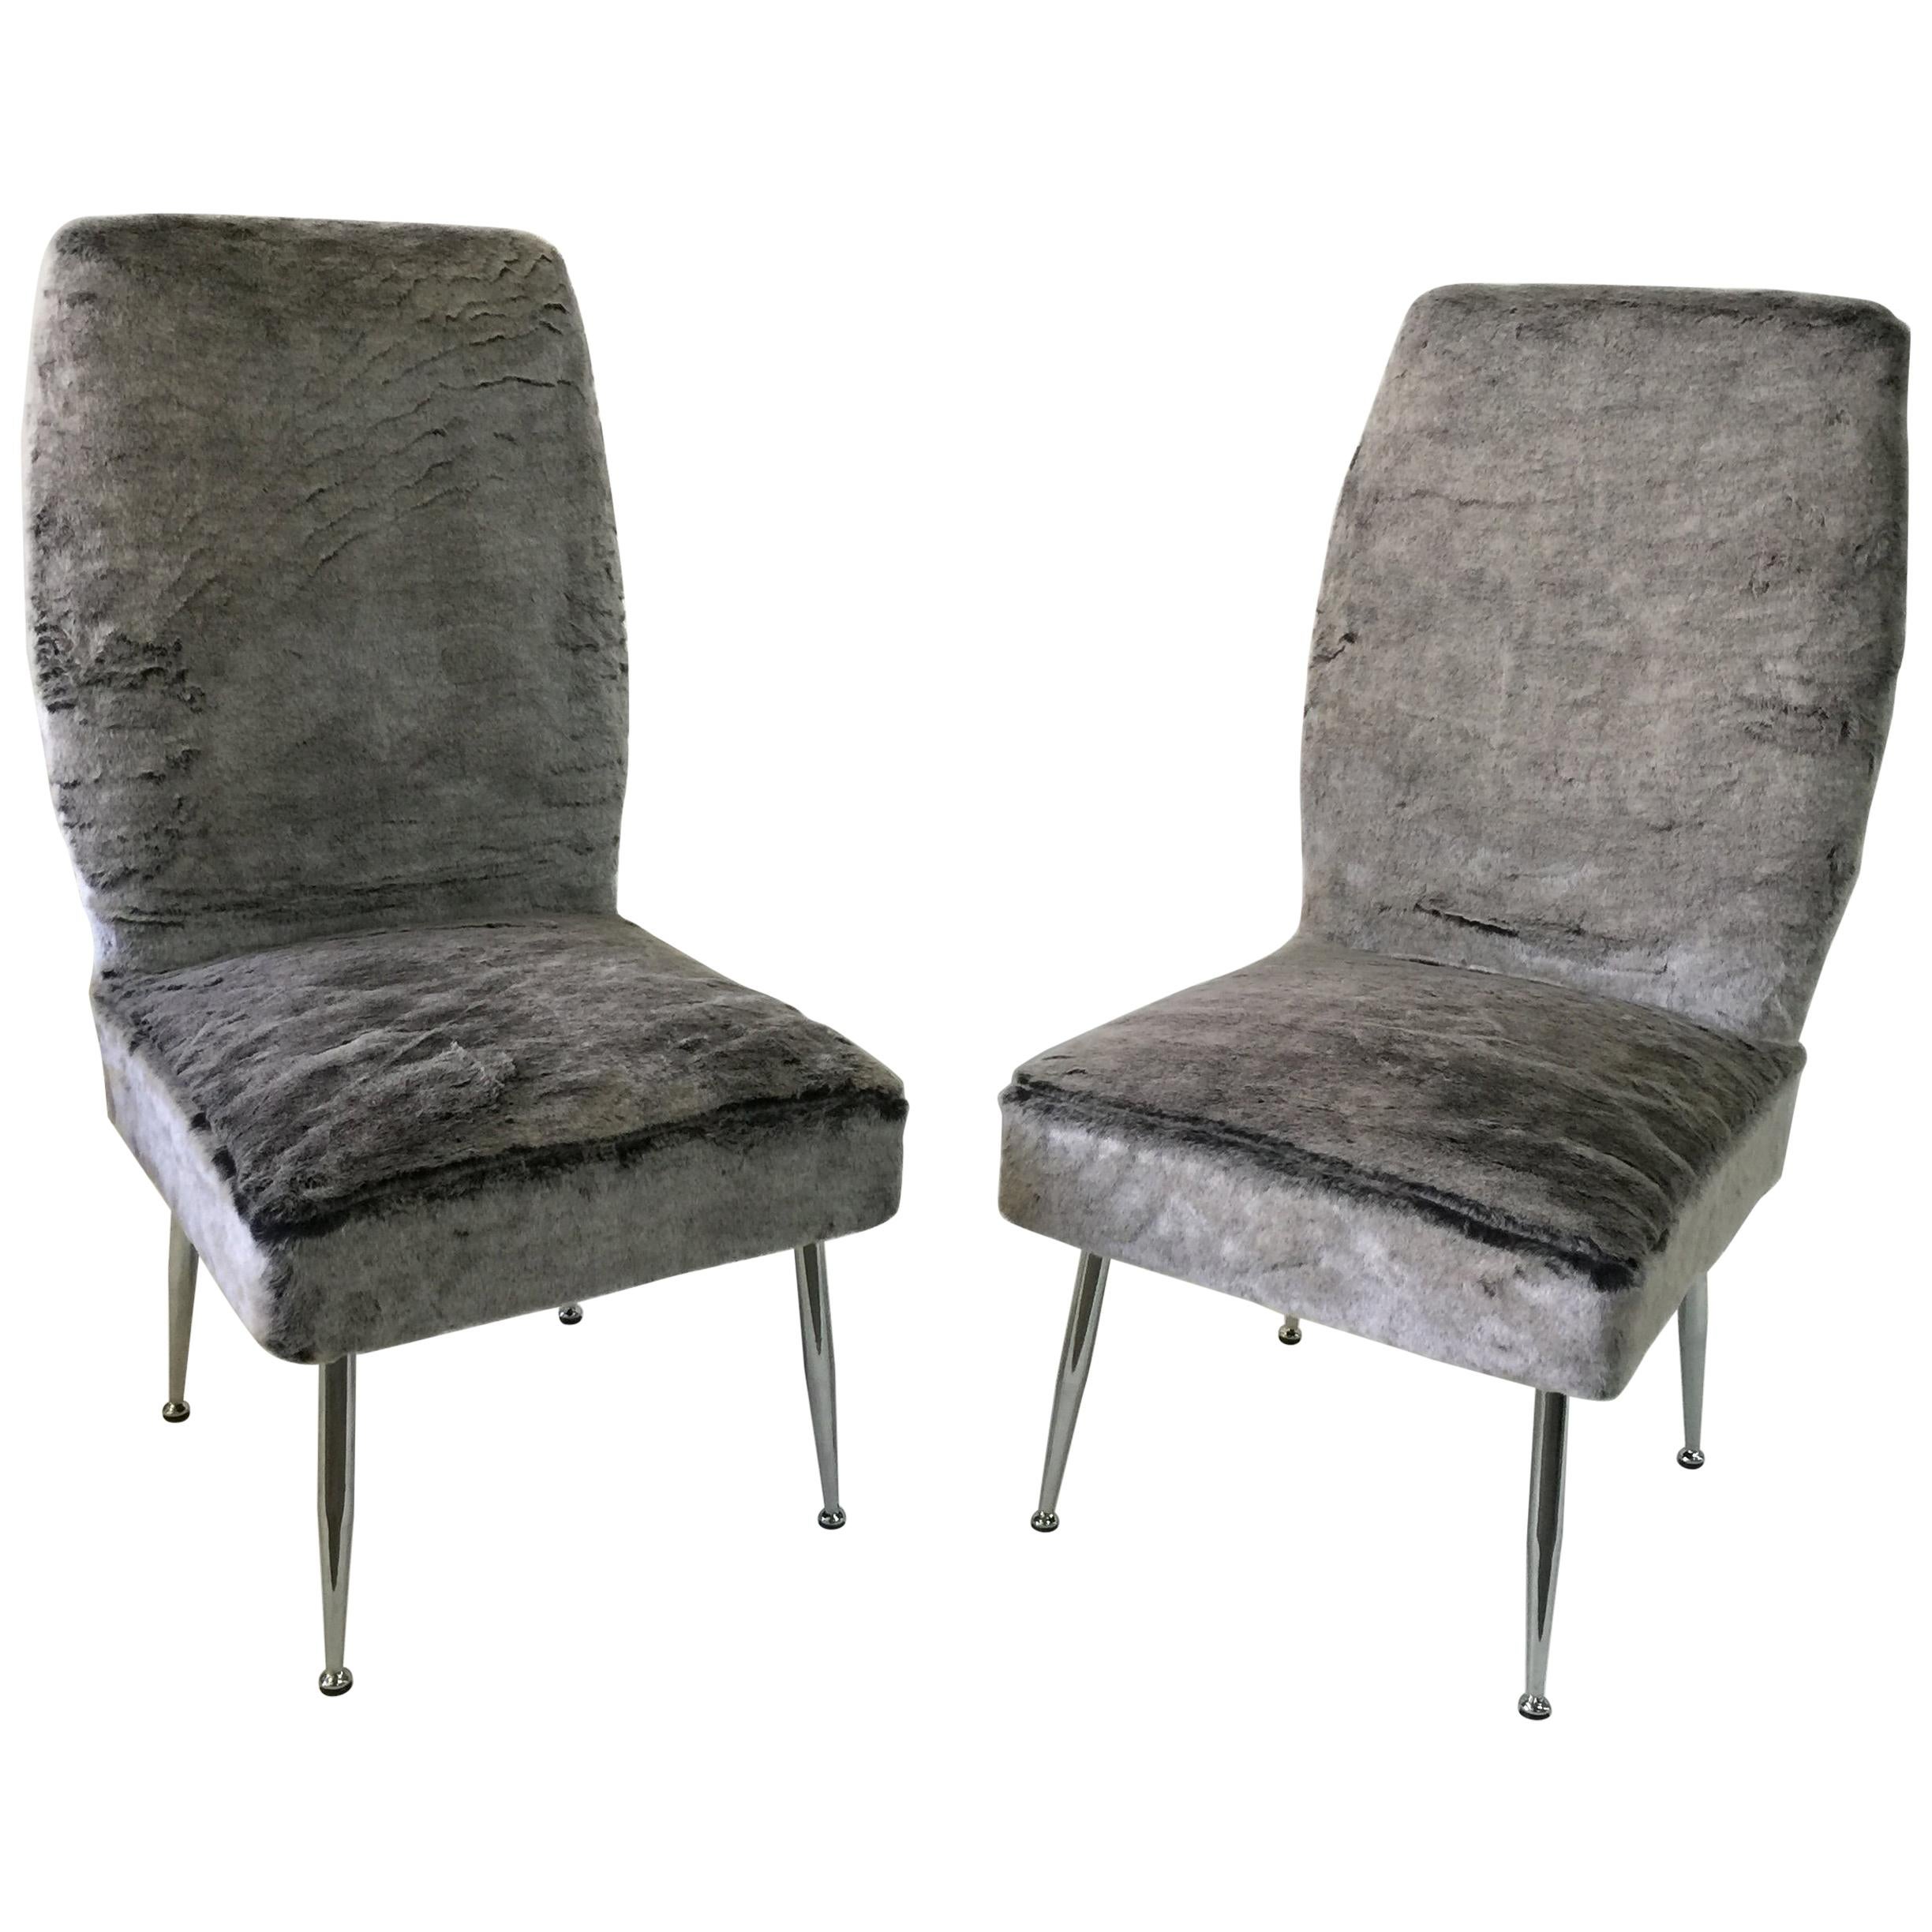 Pair of Vintage Italian Plush Covered Occasional Chairs  For Sale